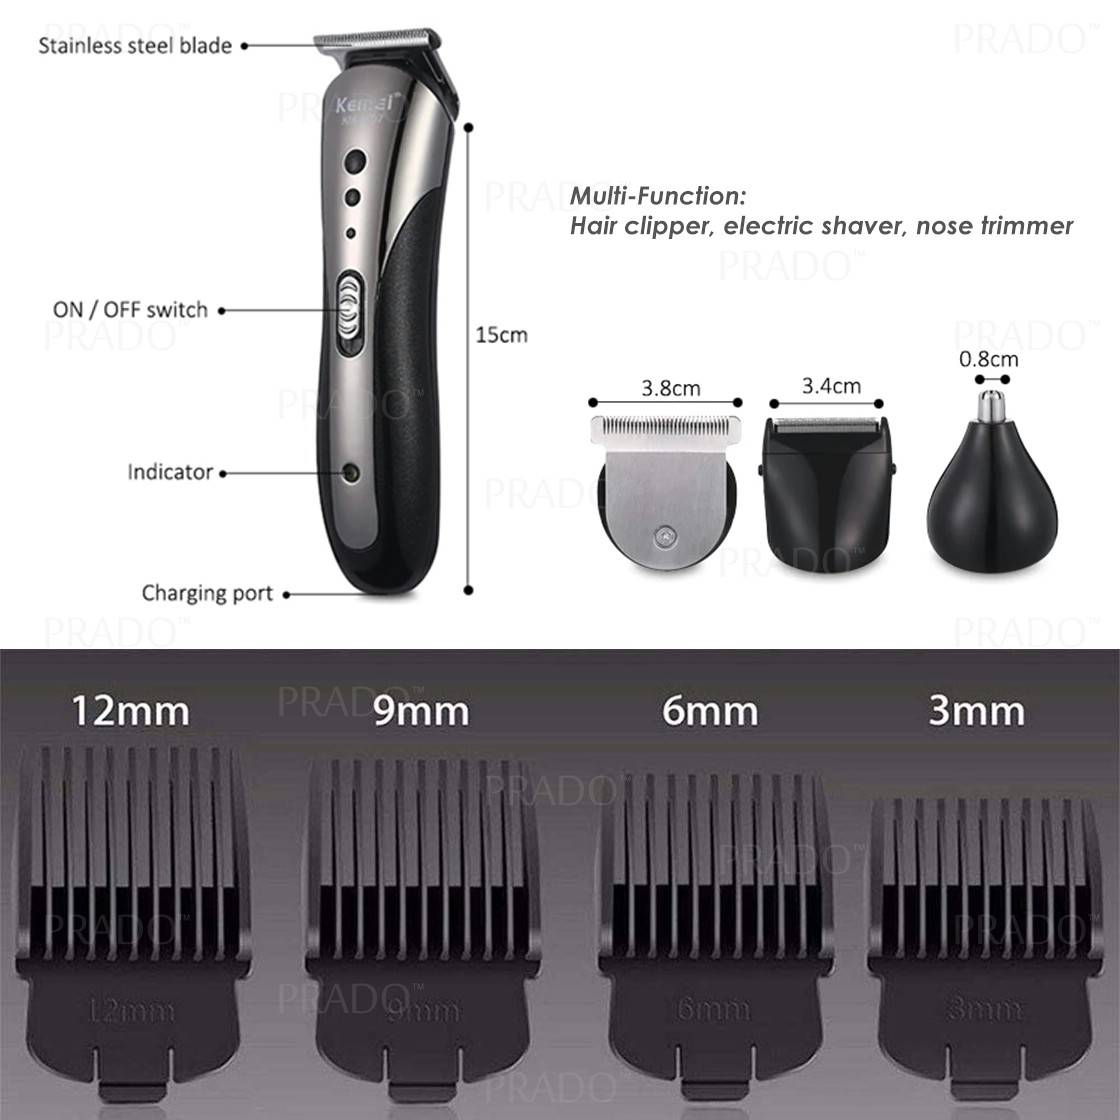 size 3 hair clippers in mm